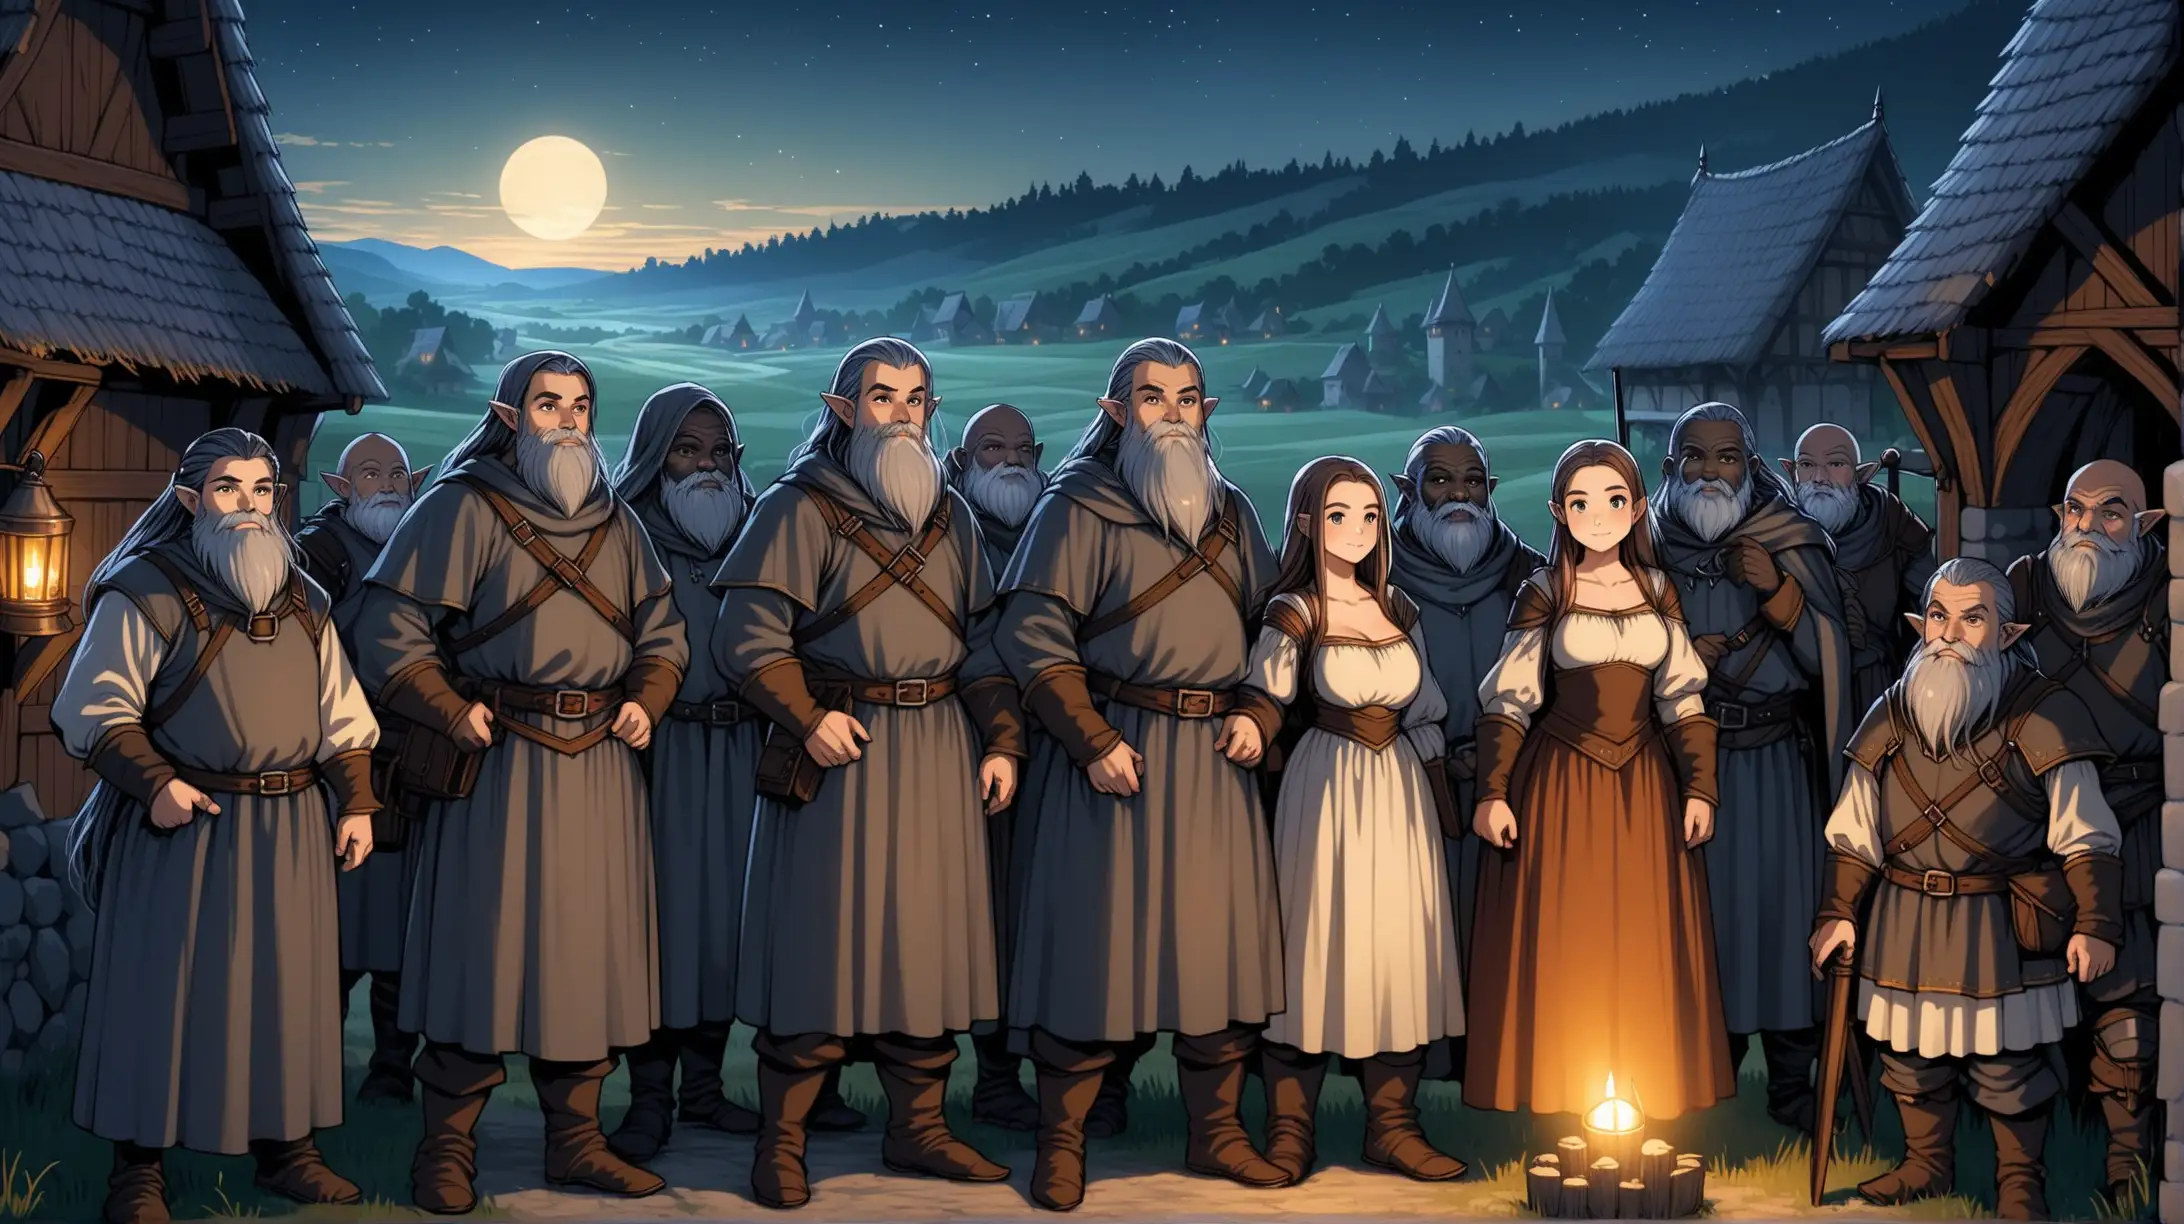 young gray dwarves with gray skin, gray dwarf men with gray skin, clean shaved gray women with no beard and gray skin, countryside night, Medieval fantasy